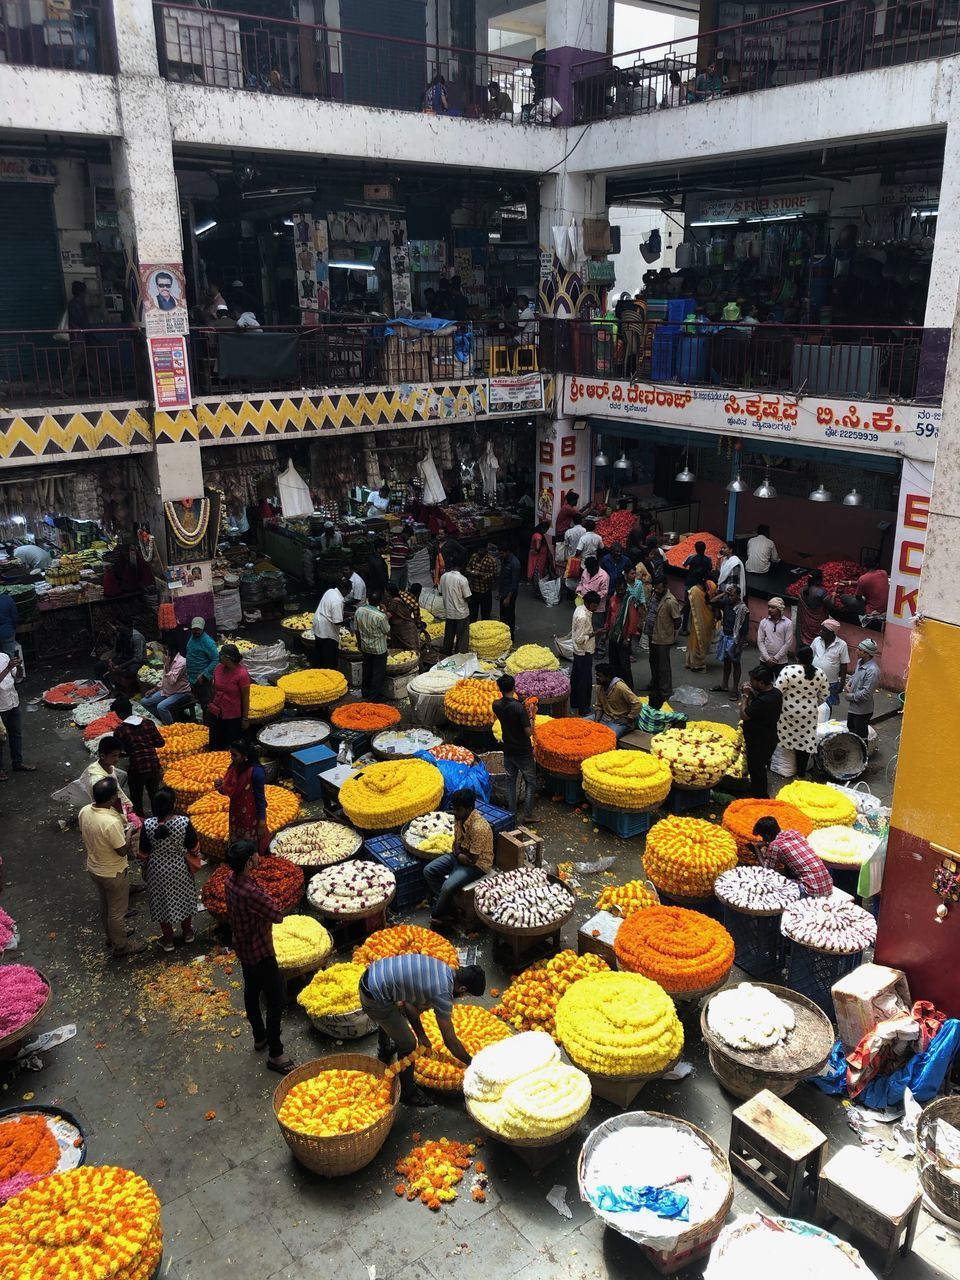 GROUP OF PEOPLE IN MARKET